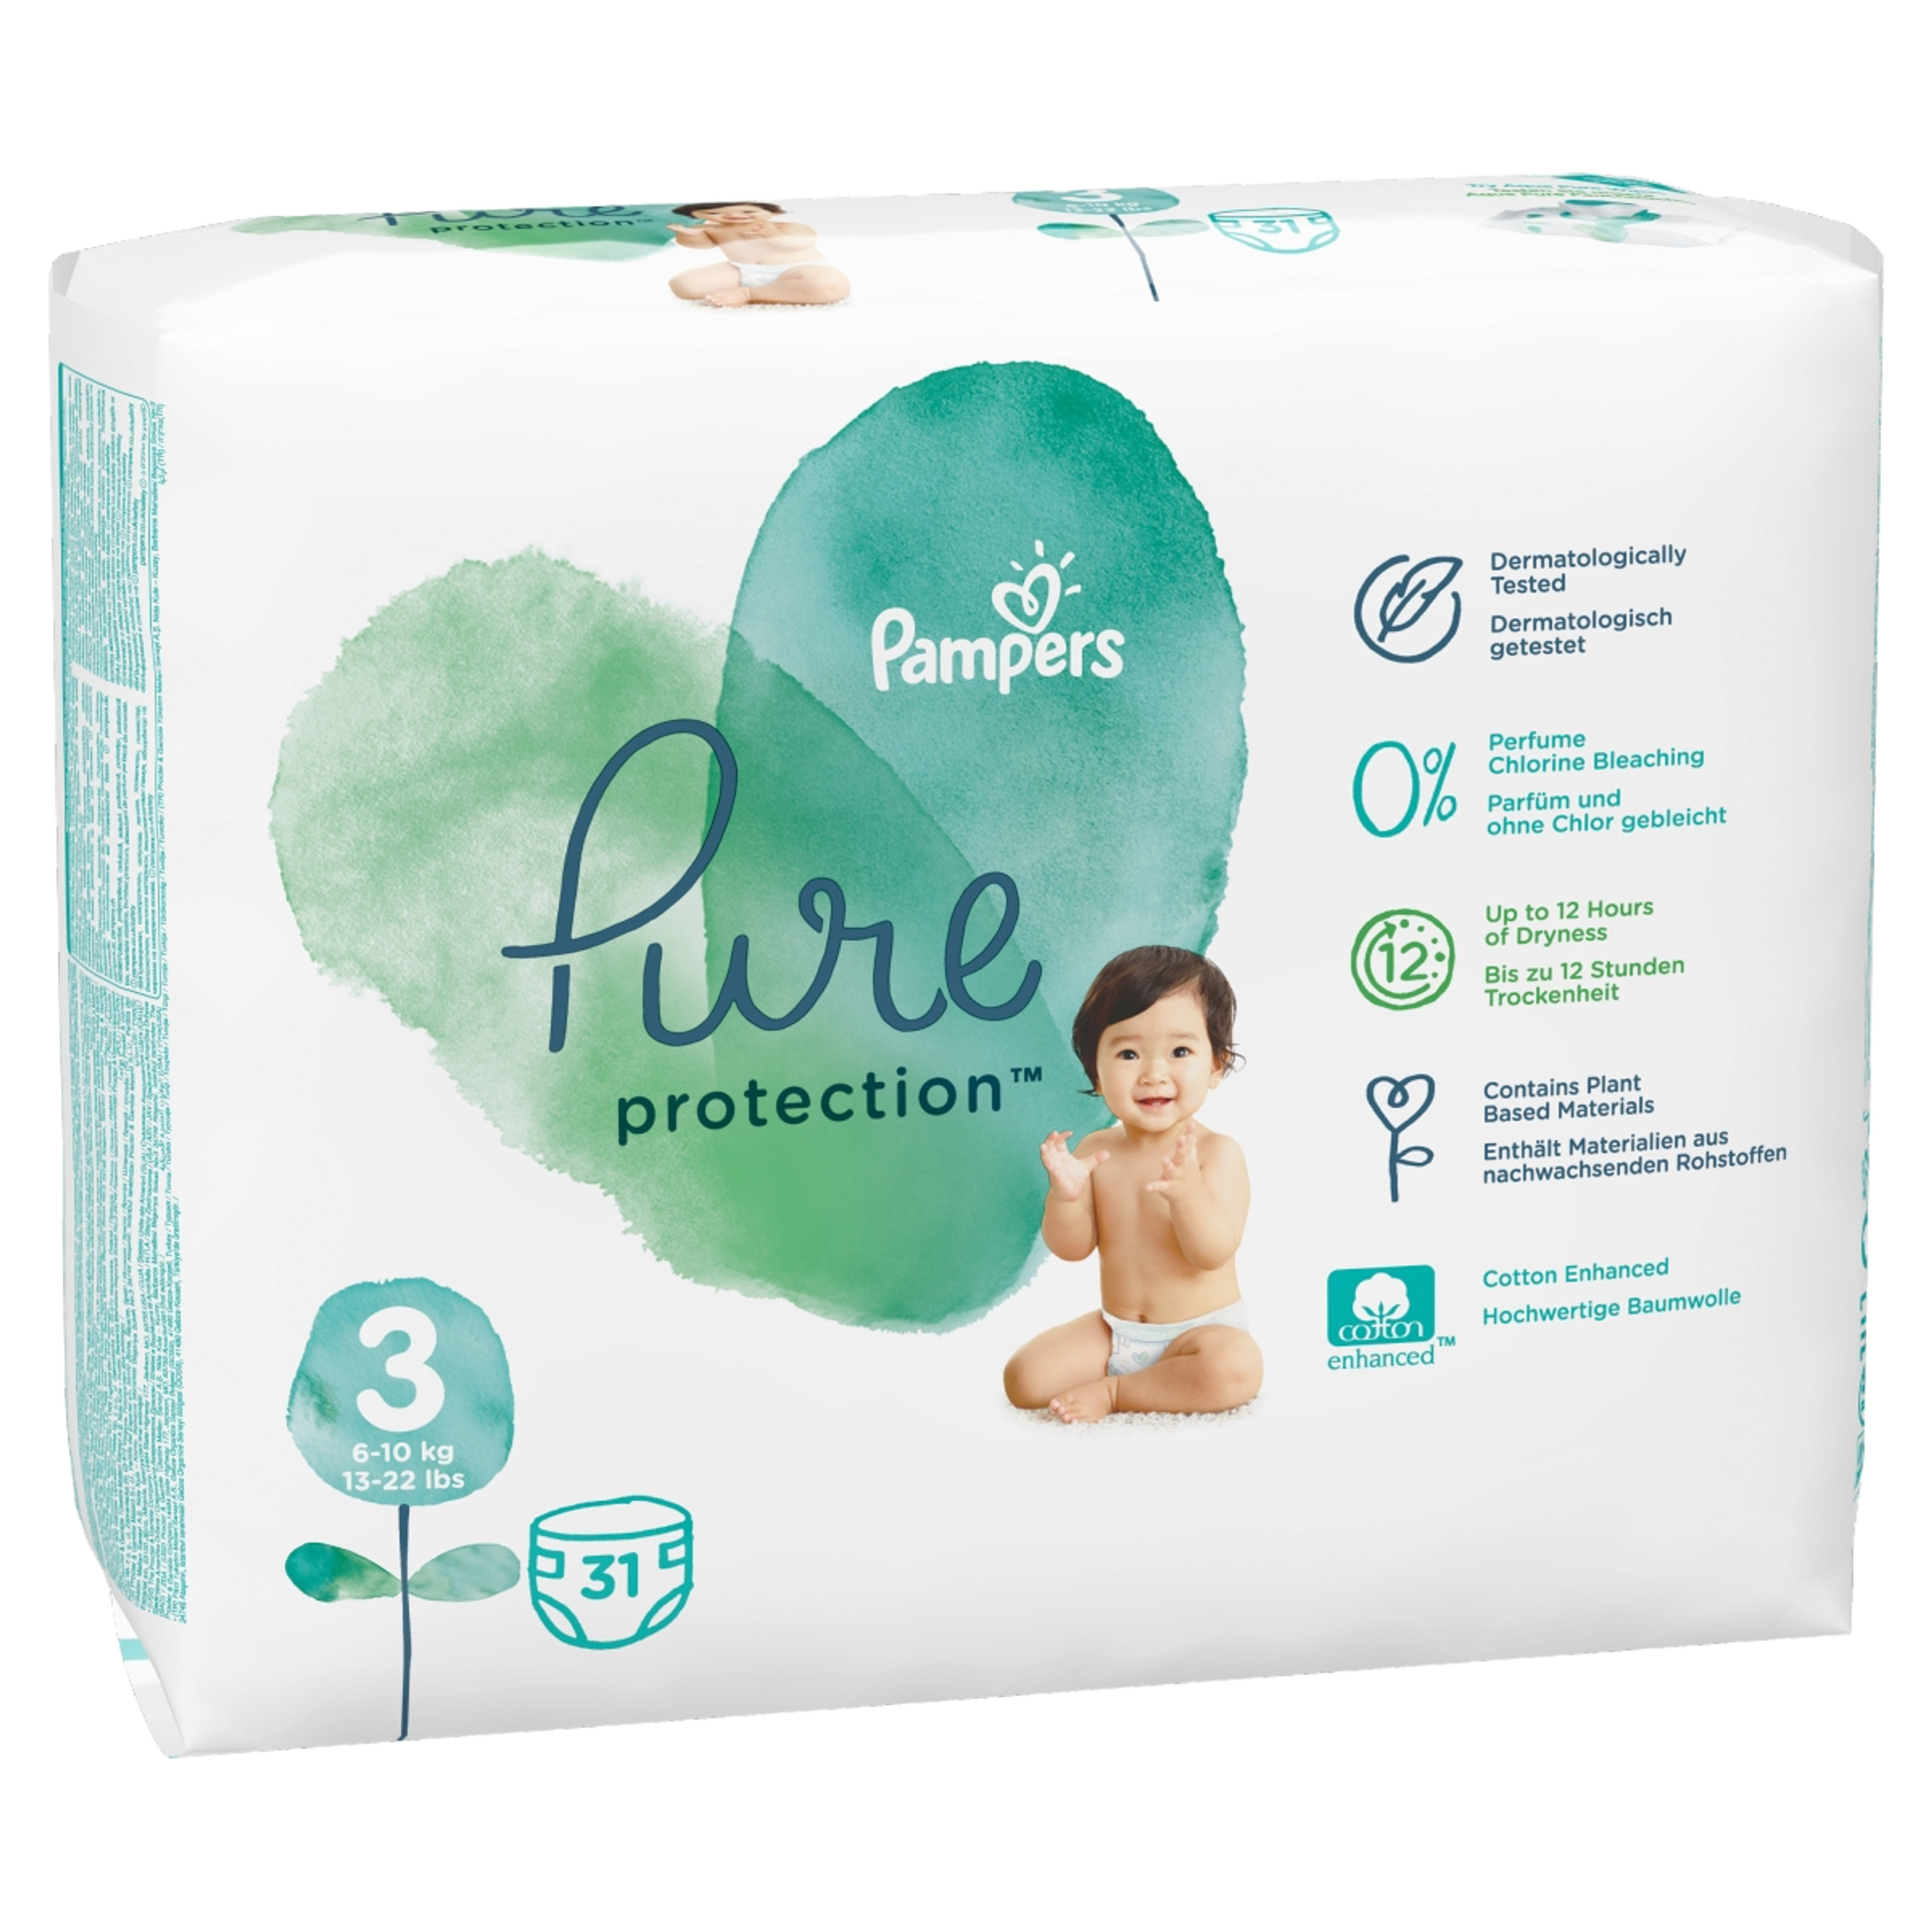 Pampers Pure ProtectionPelenka 3-as 6-10kg - 31 db-3